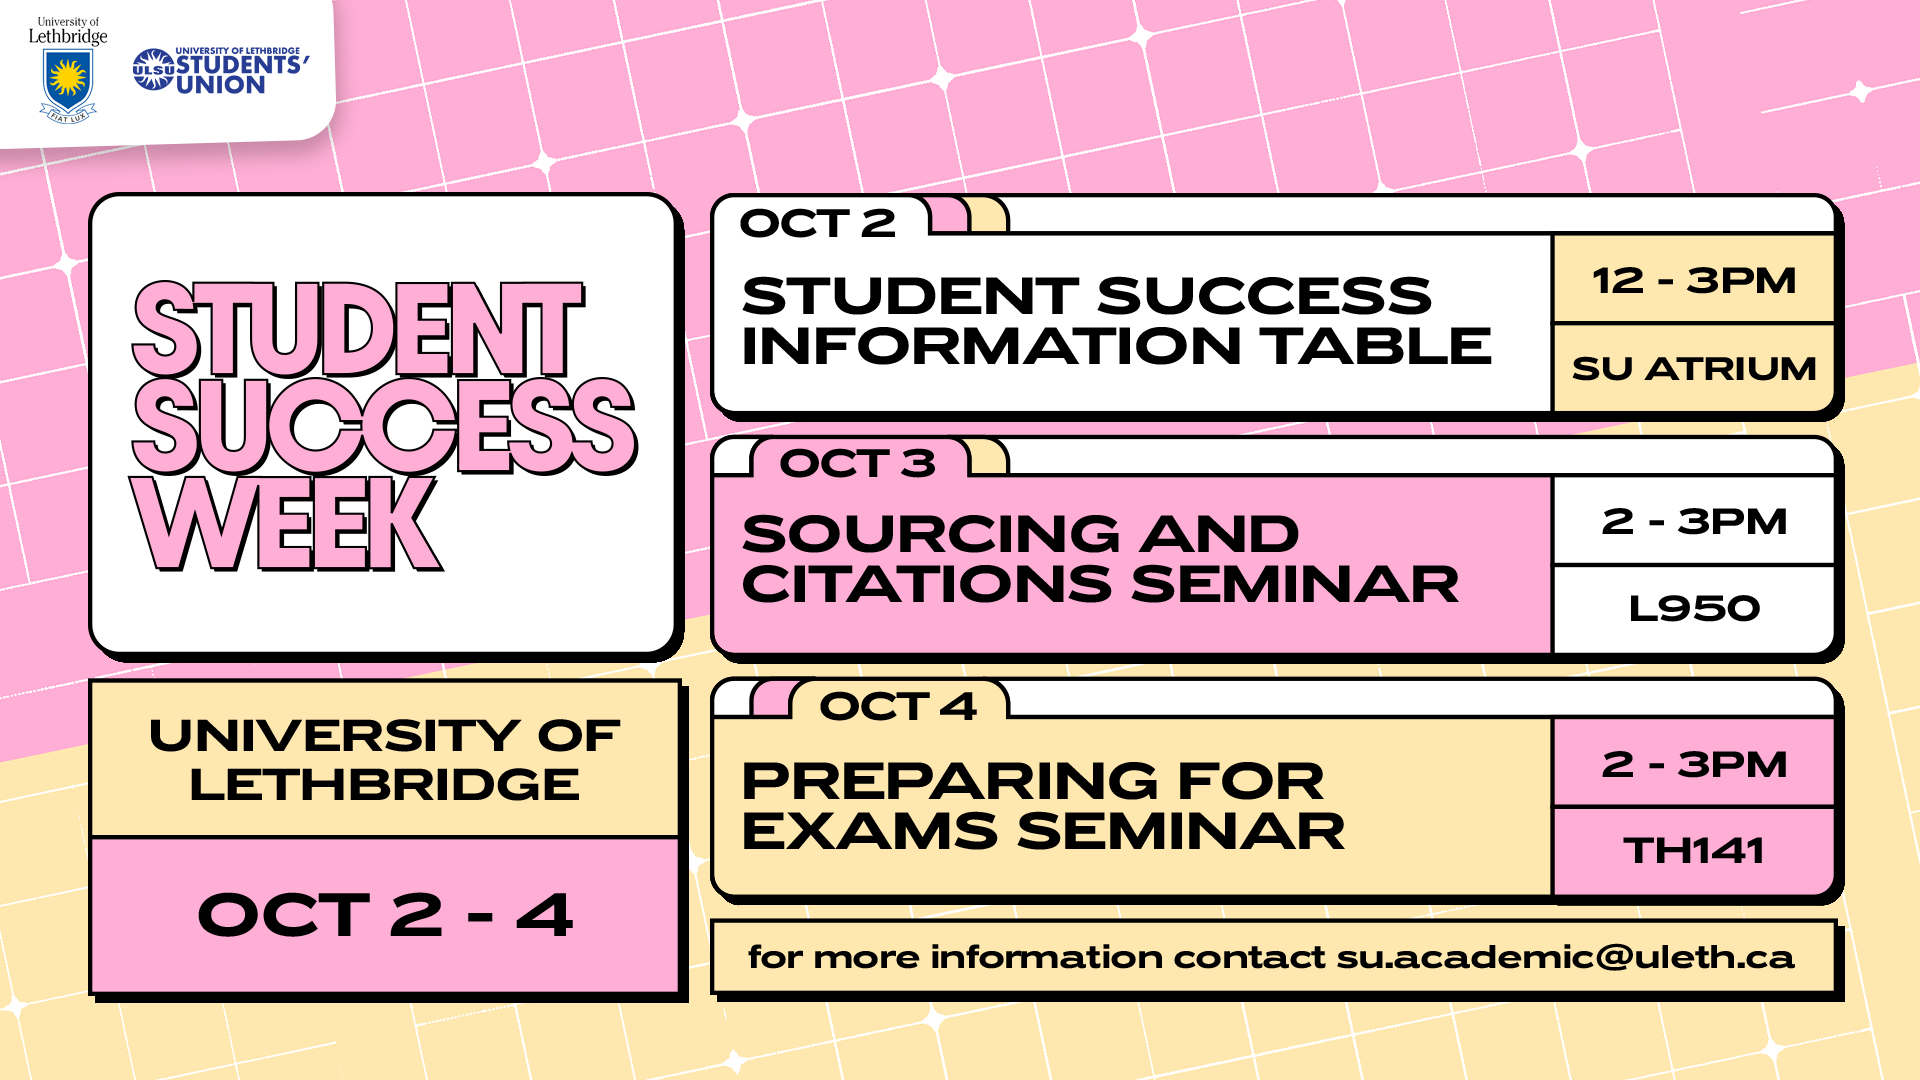 Student Success Week October 2 to 4